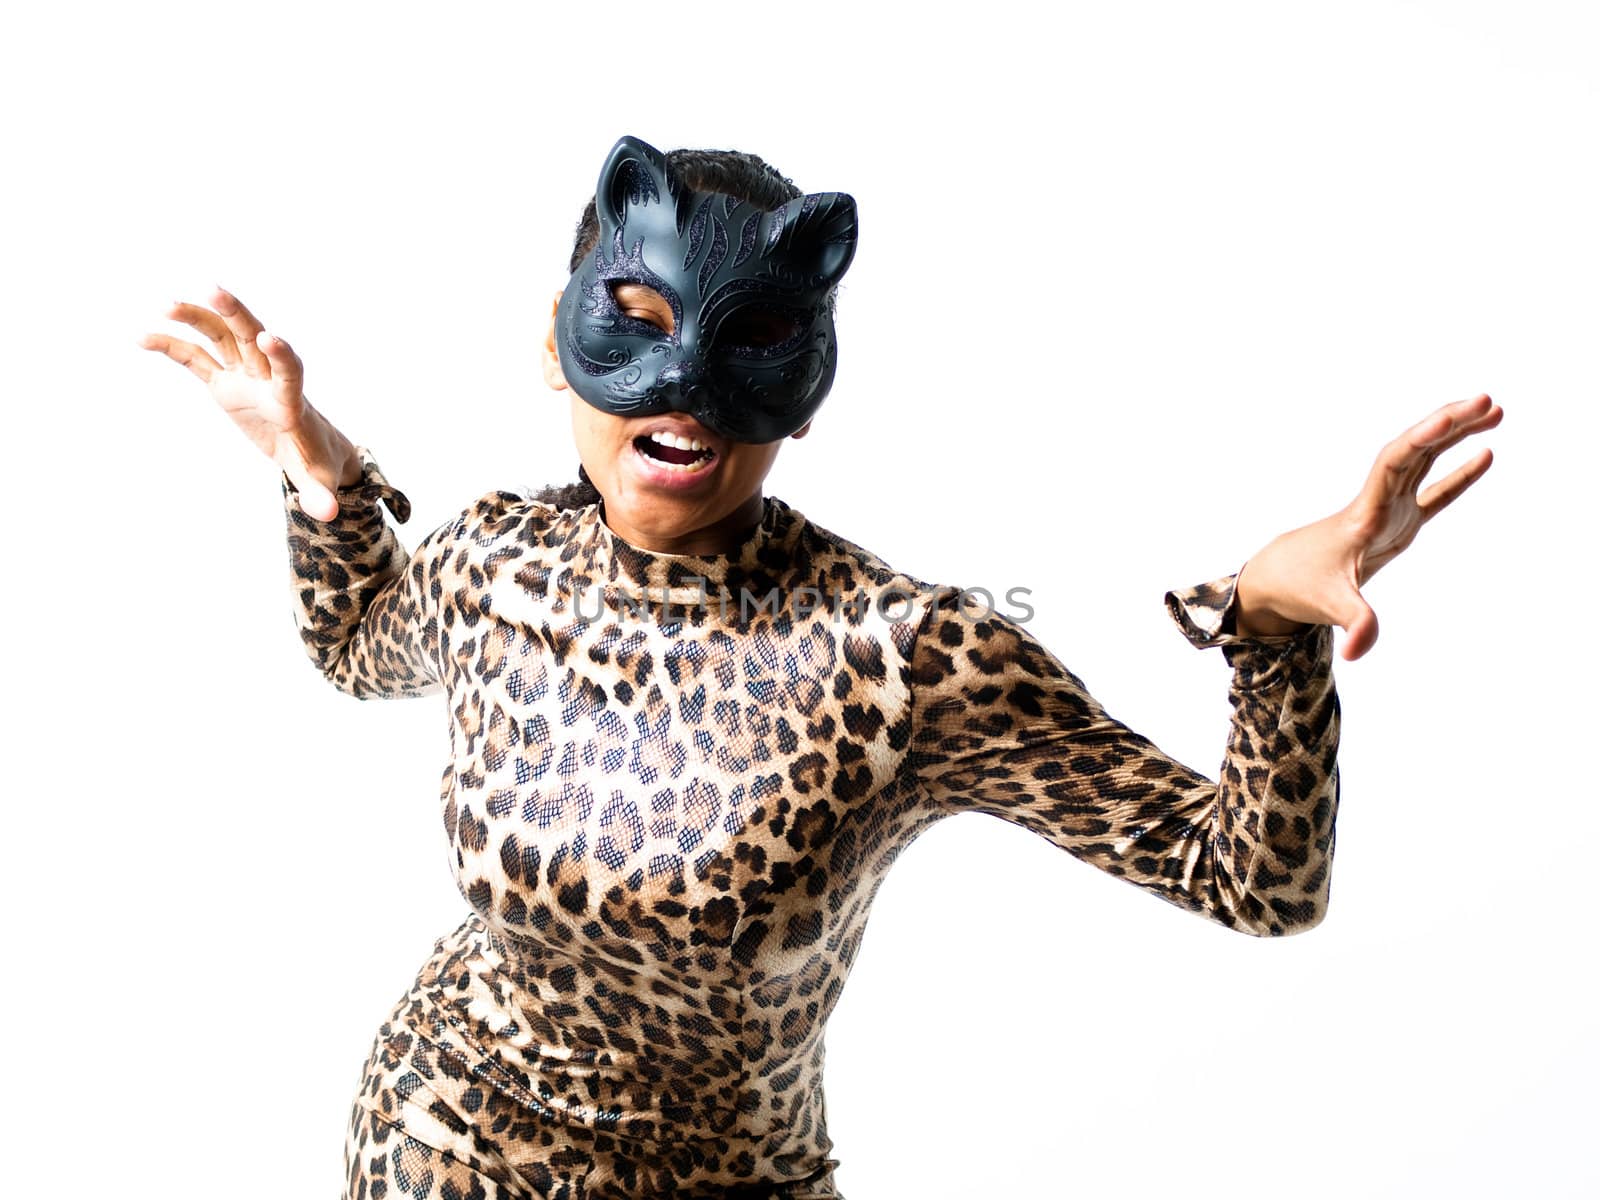 Dancer dressed in a leopard suit and cat mask; attacking and aggressive